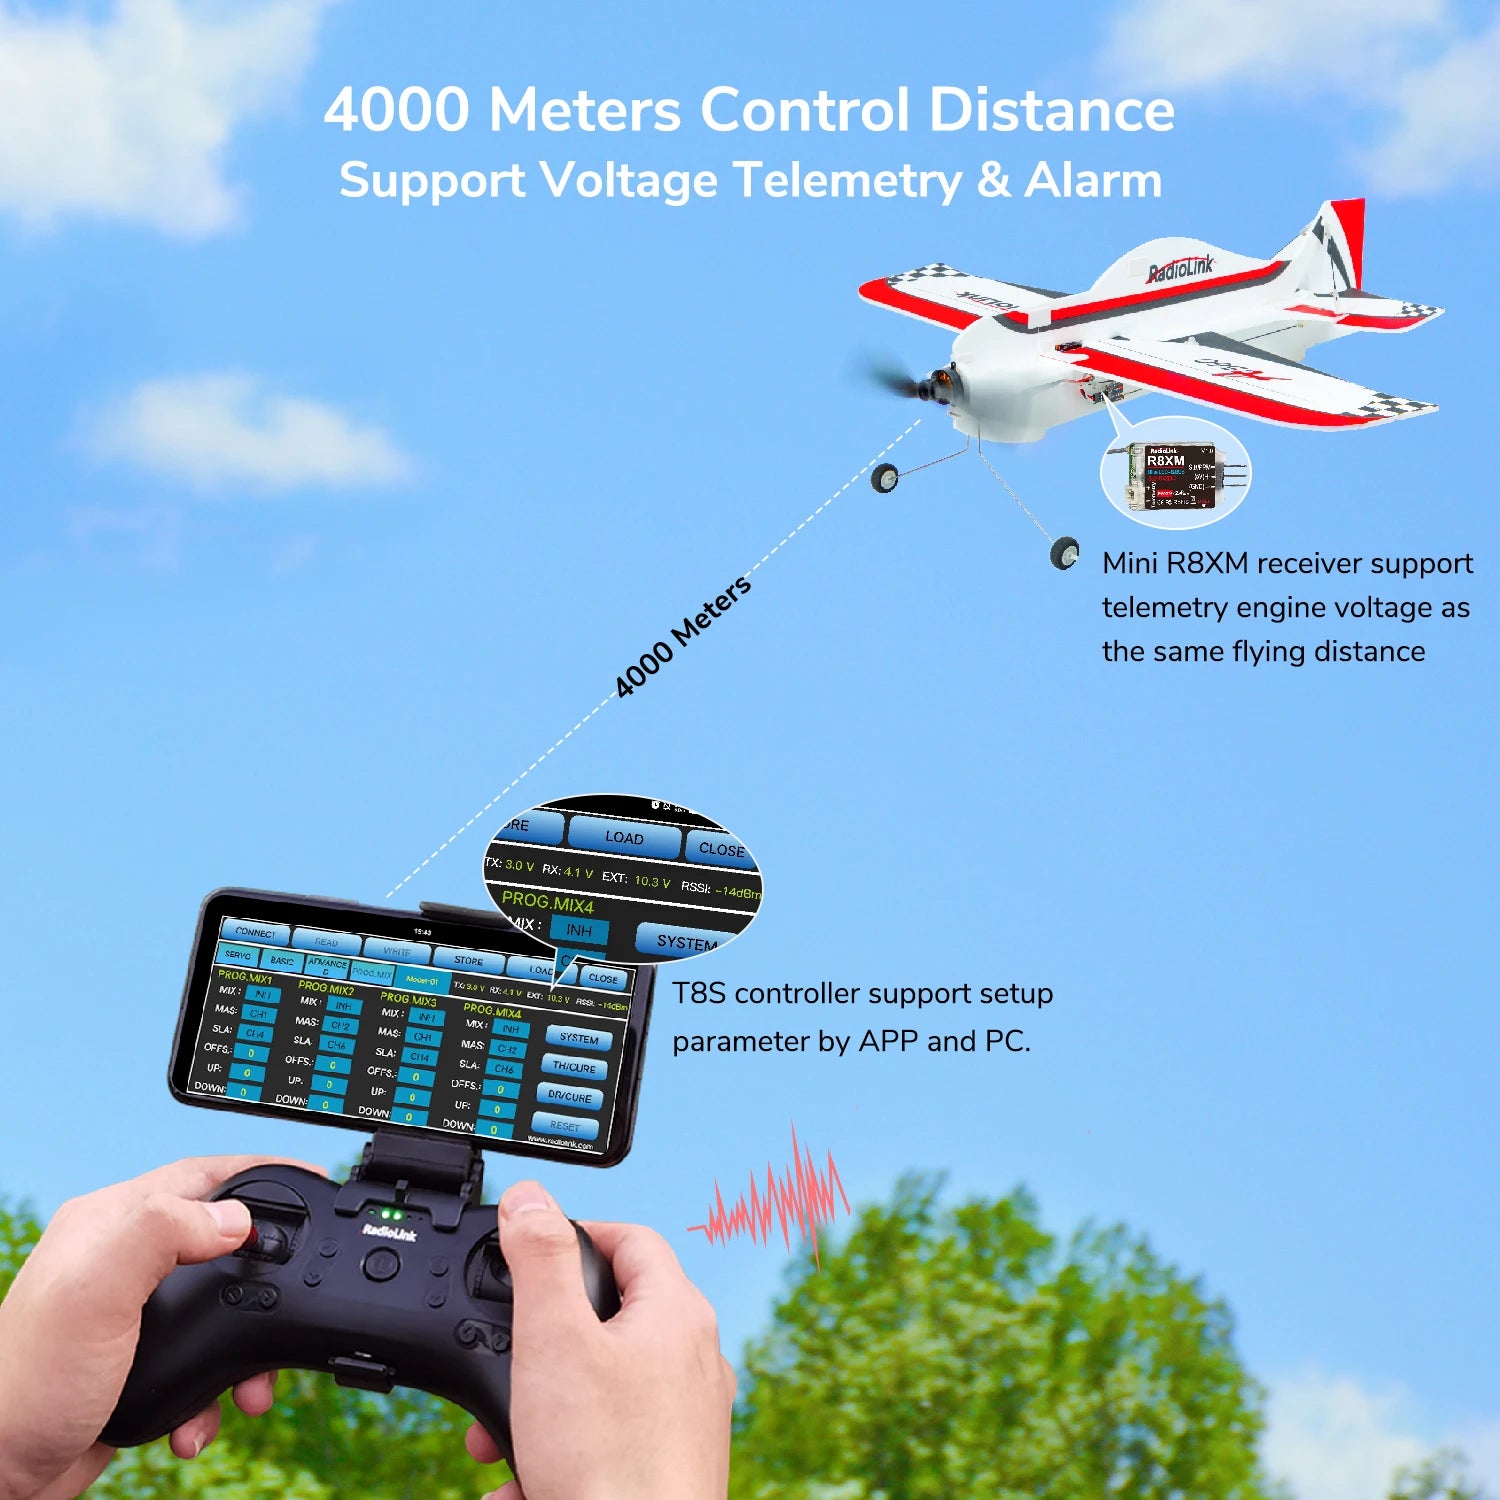 Radiolink A560 4CH RC Airplane, Zehed Mini R8XM receiver support telemetry engine voltage as the same flying